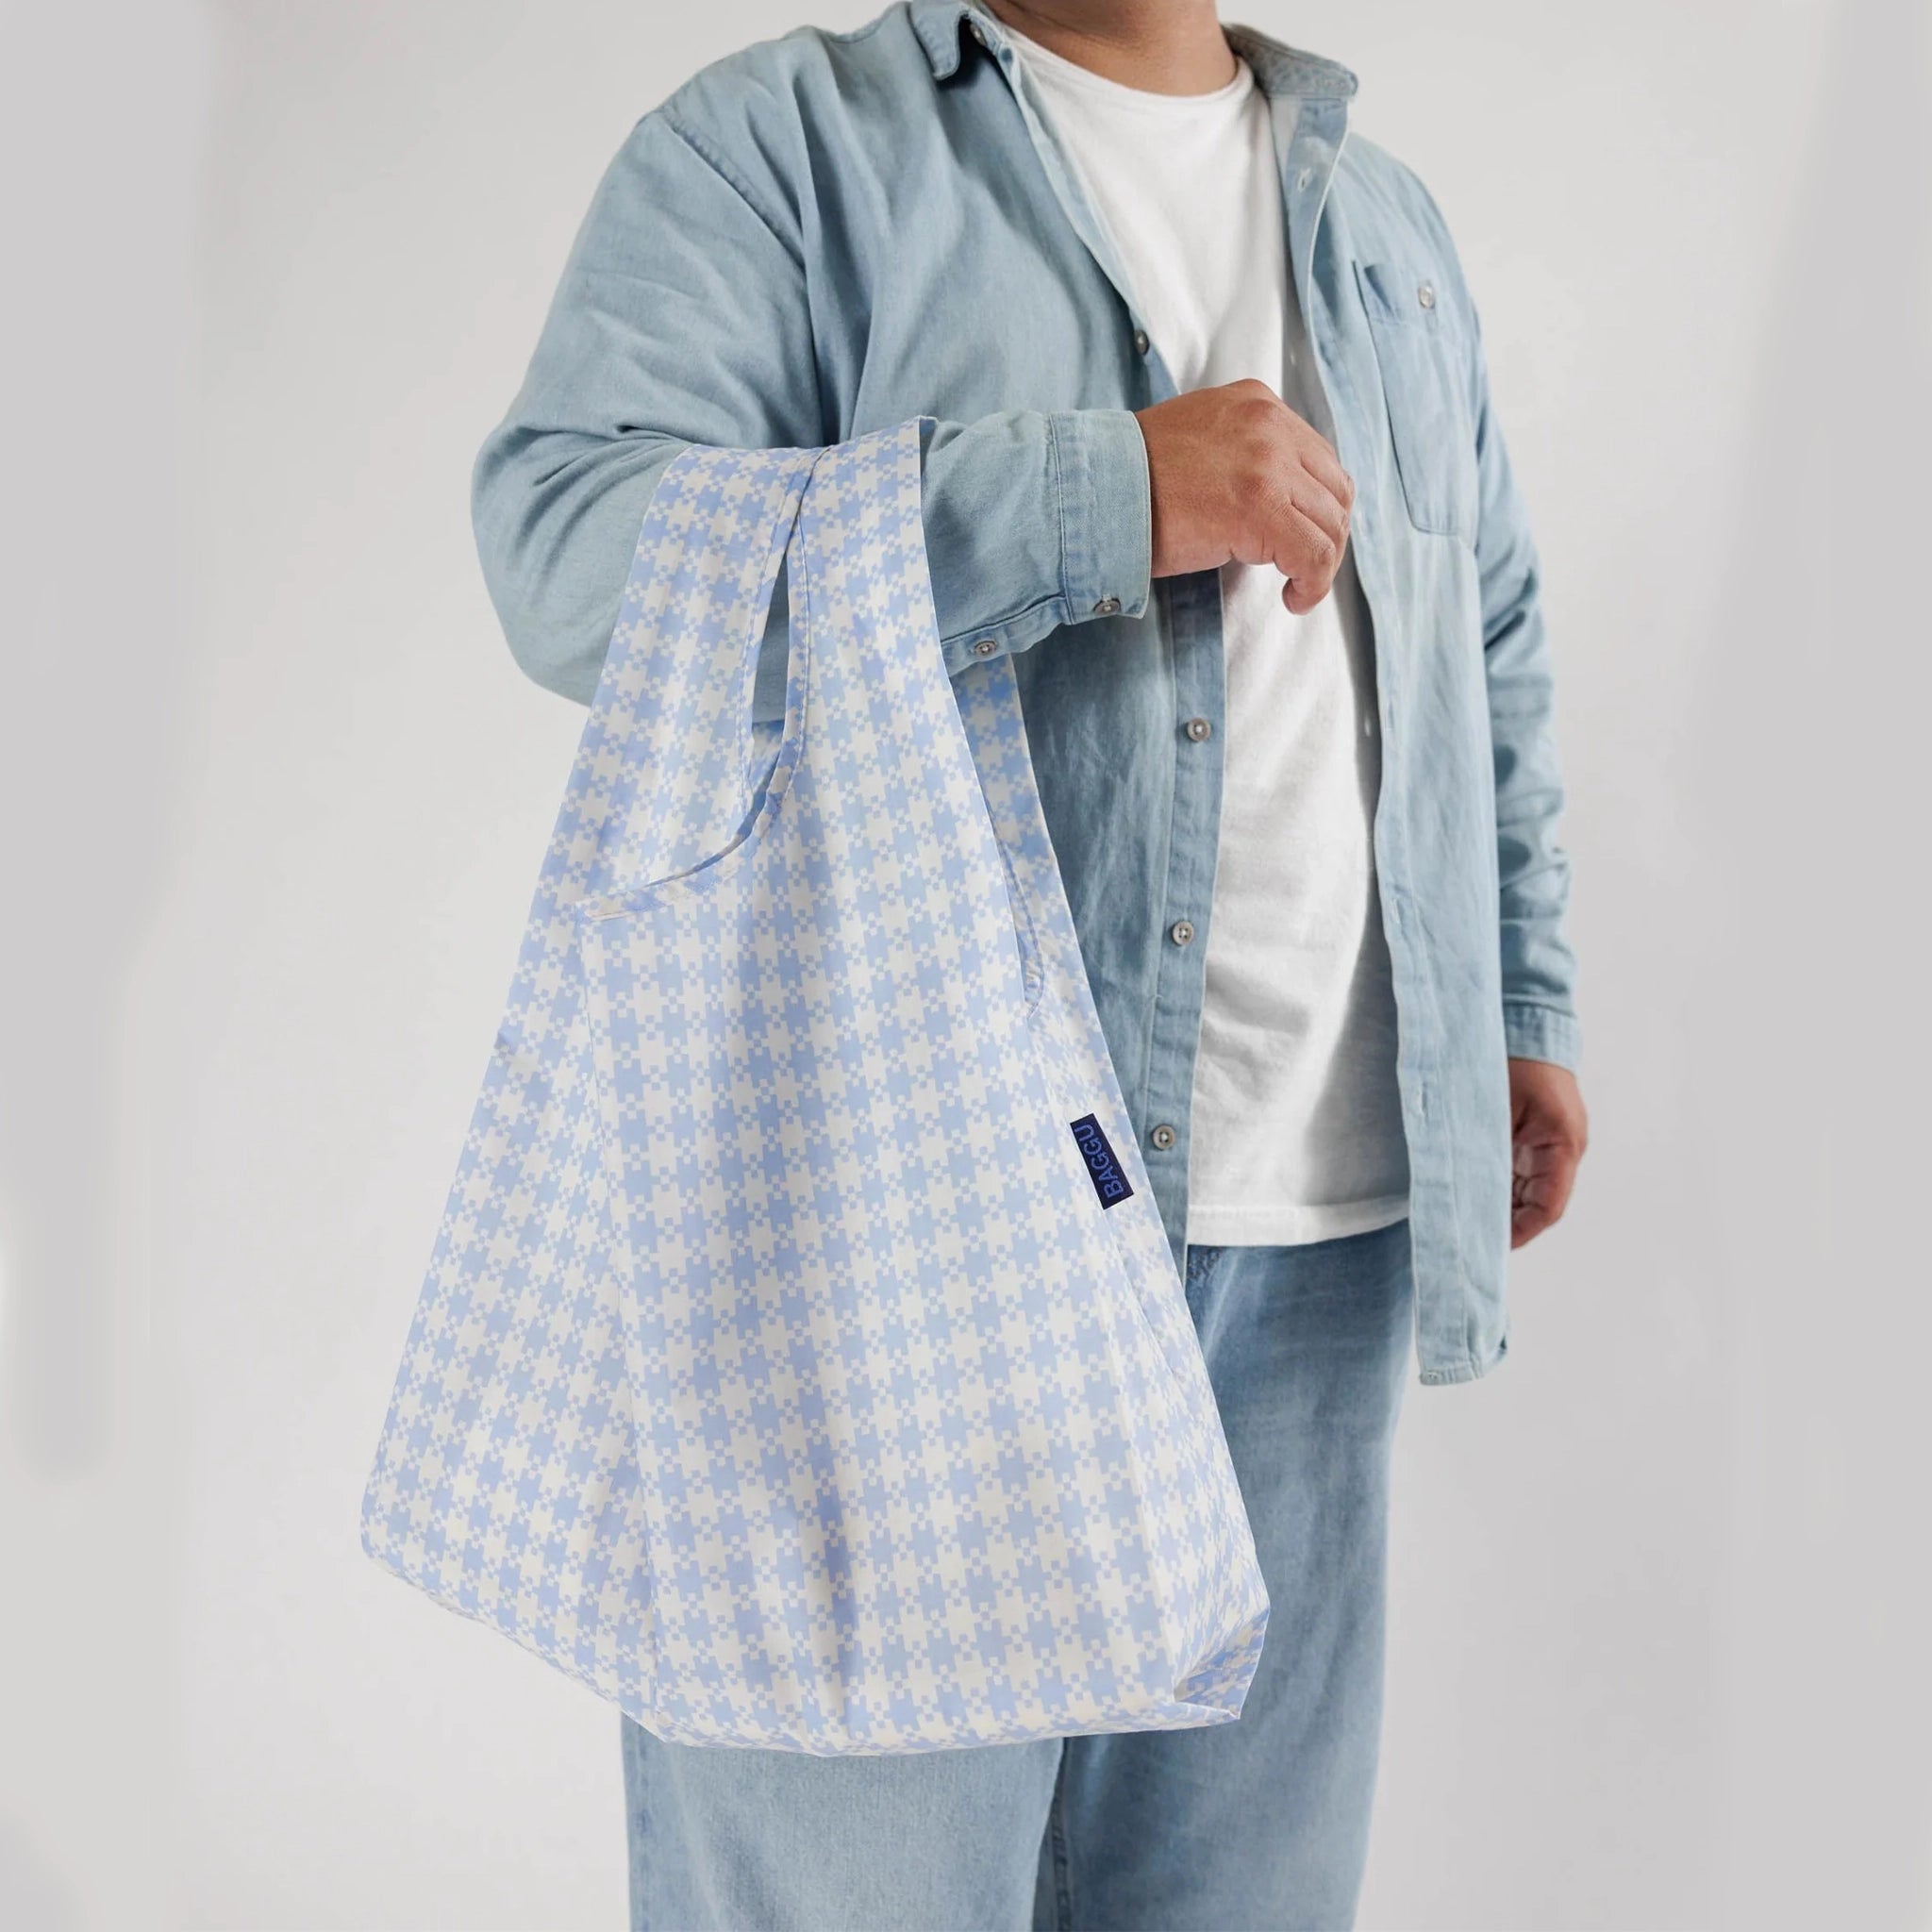 On a white background is a model holding a blue and white gingham printed nylon tote bag. 